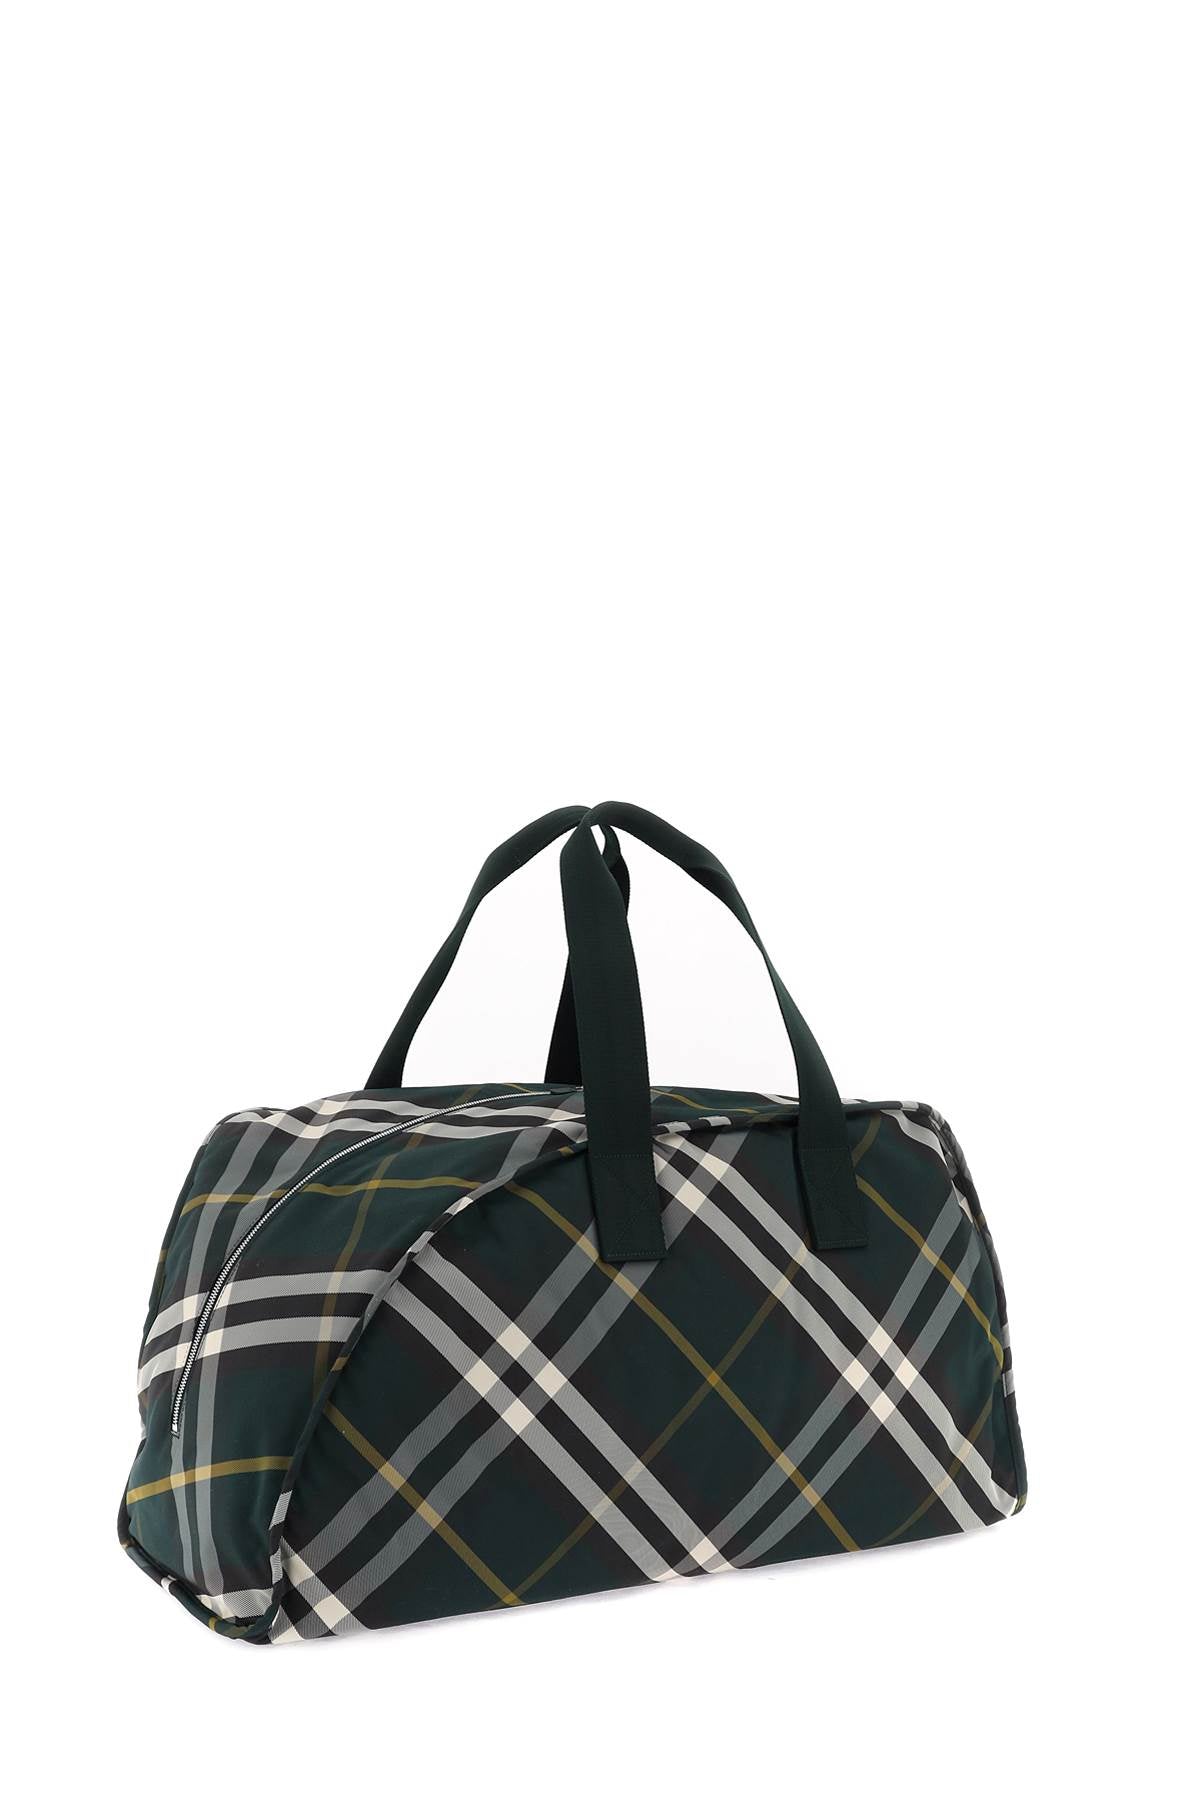 BURBERRY Large Shield-Shaped Green Check Pattern Nylon Duffel Bag with Leather Base for Men